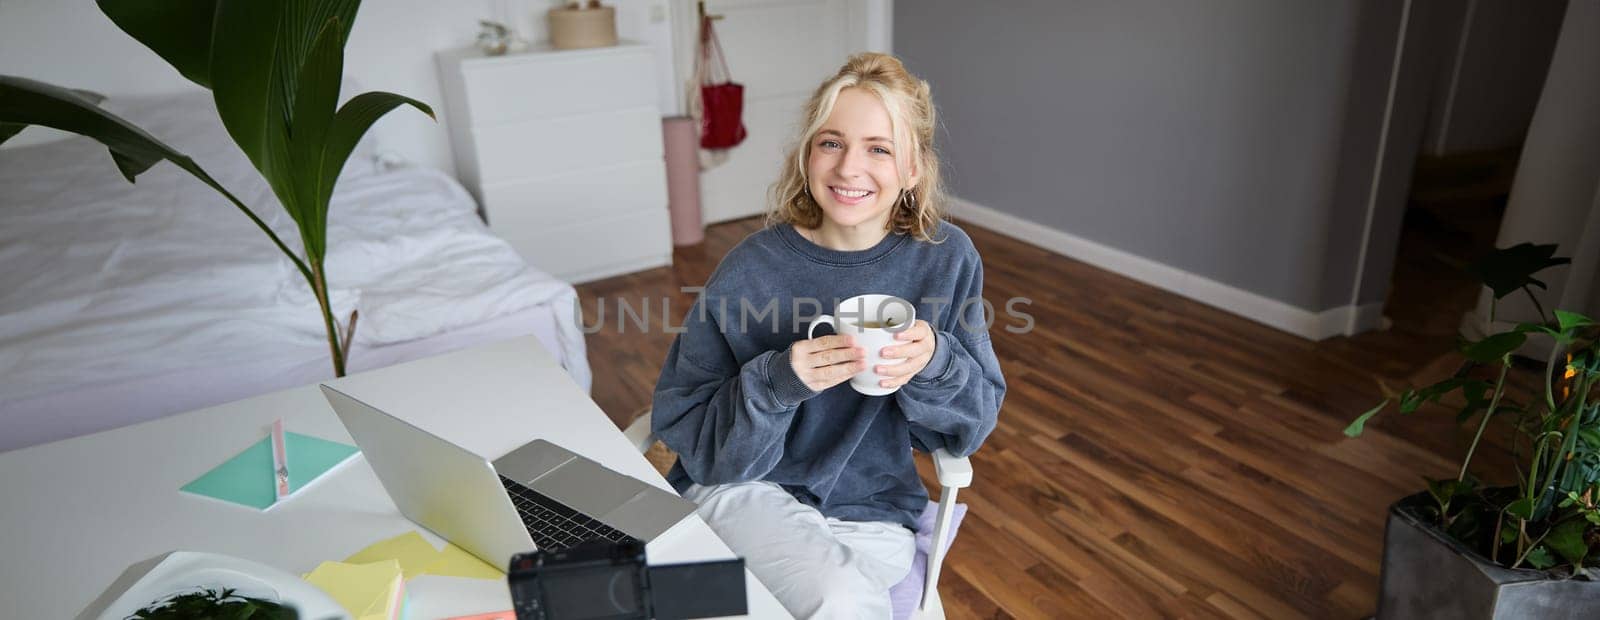 Image of young woman, social media influencer, editing her video on laptop, sits in a room with computer and digital camera, drinking coffee, smiling at camera.